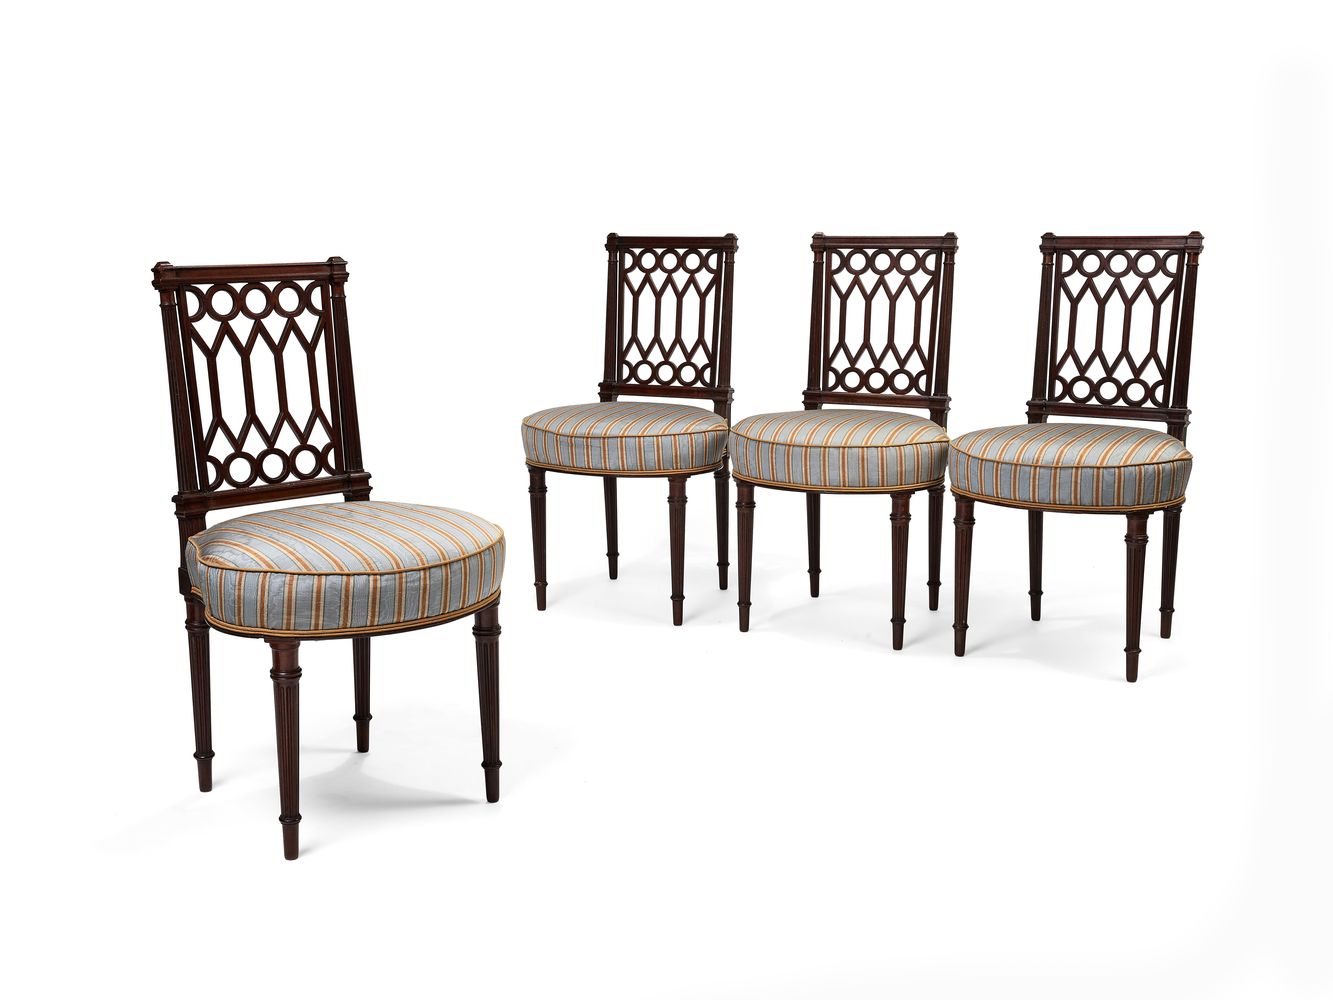 A set of four Victorian mahogany side chairs, in Louis XVI style, circa 1880